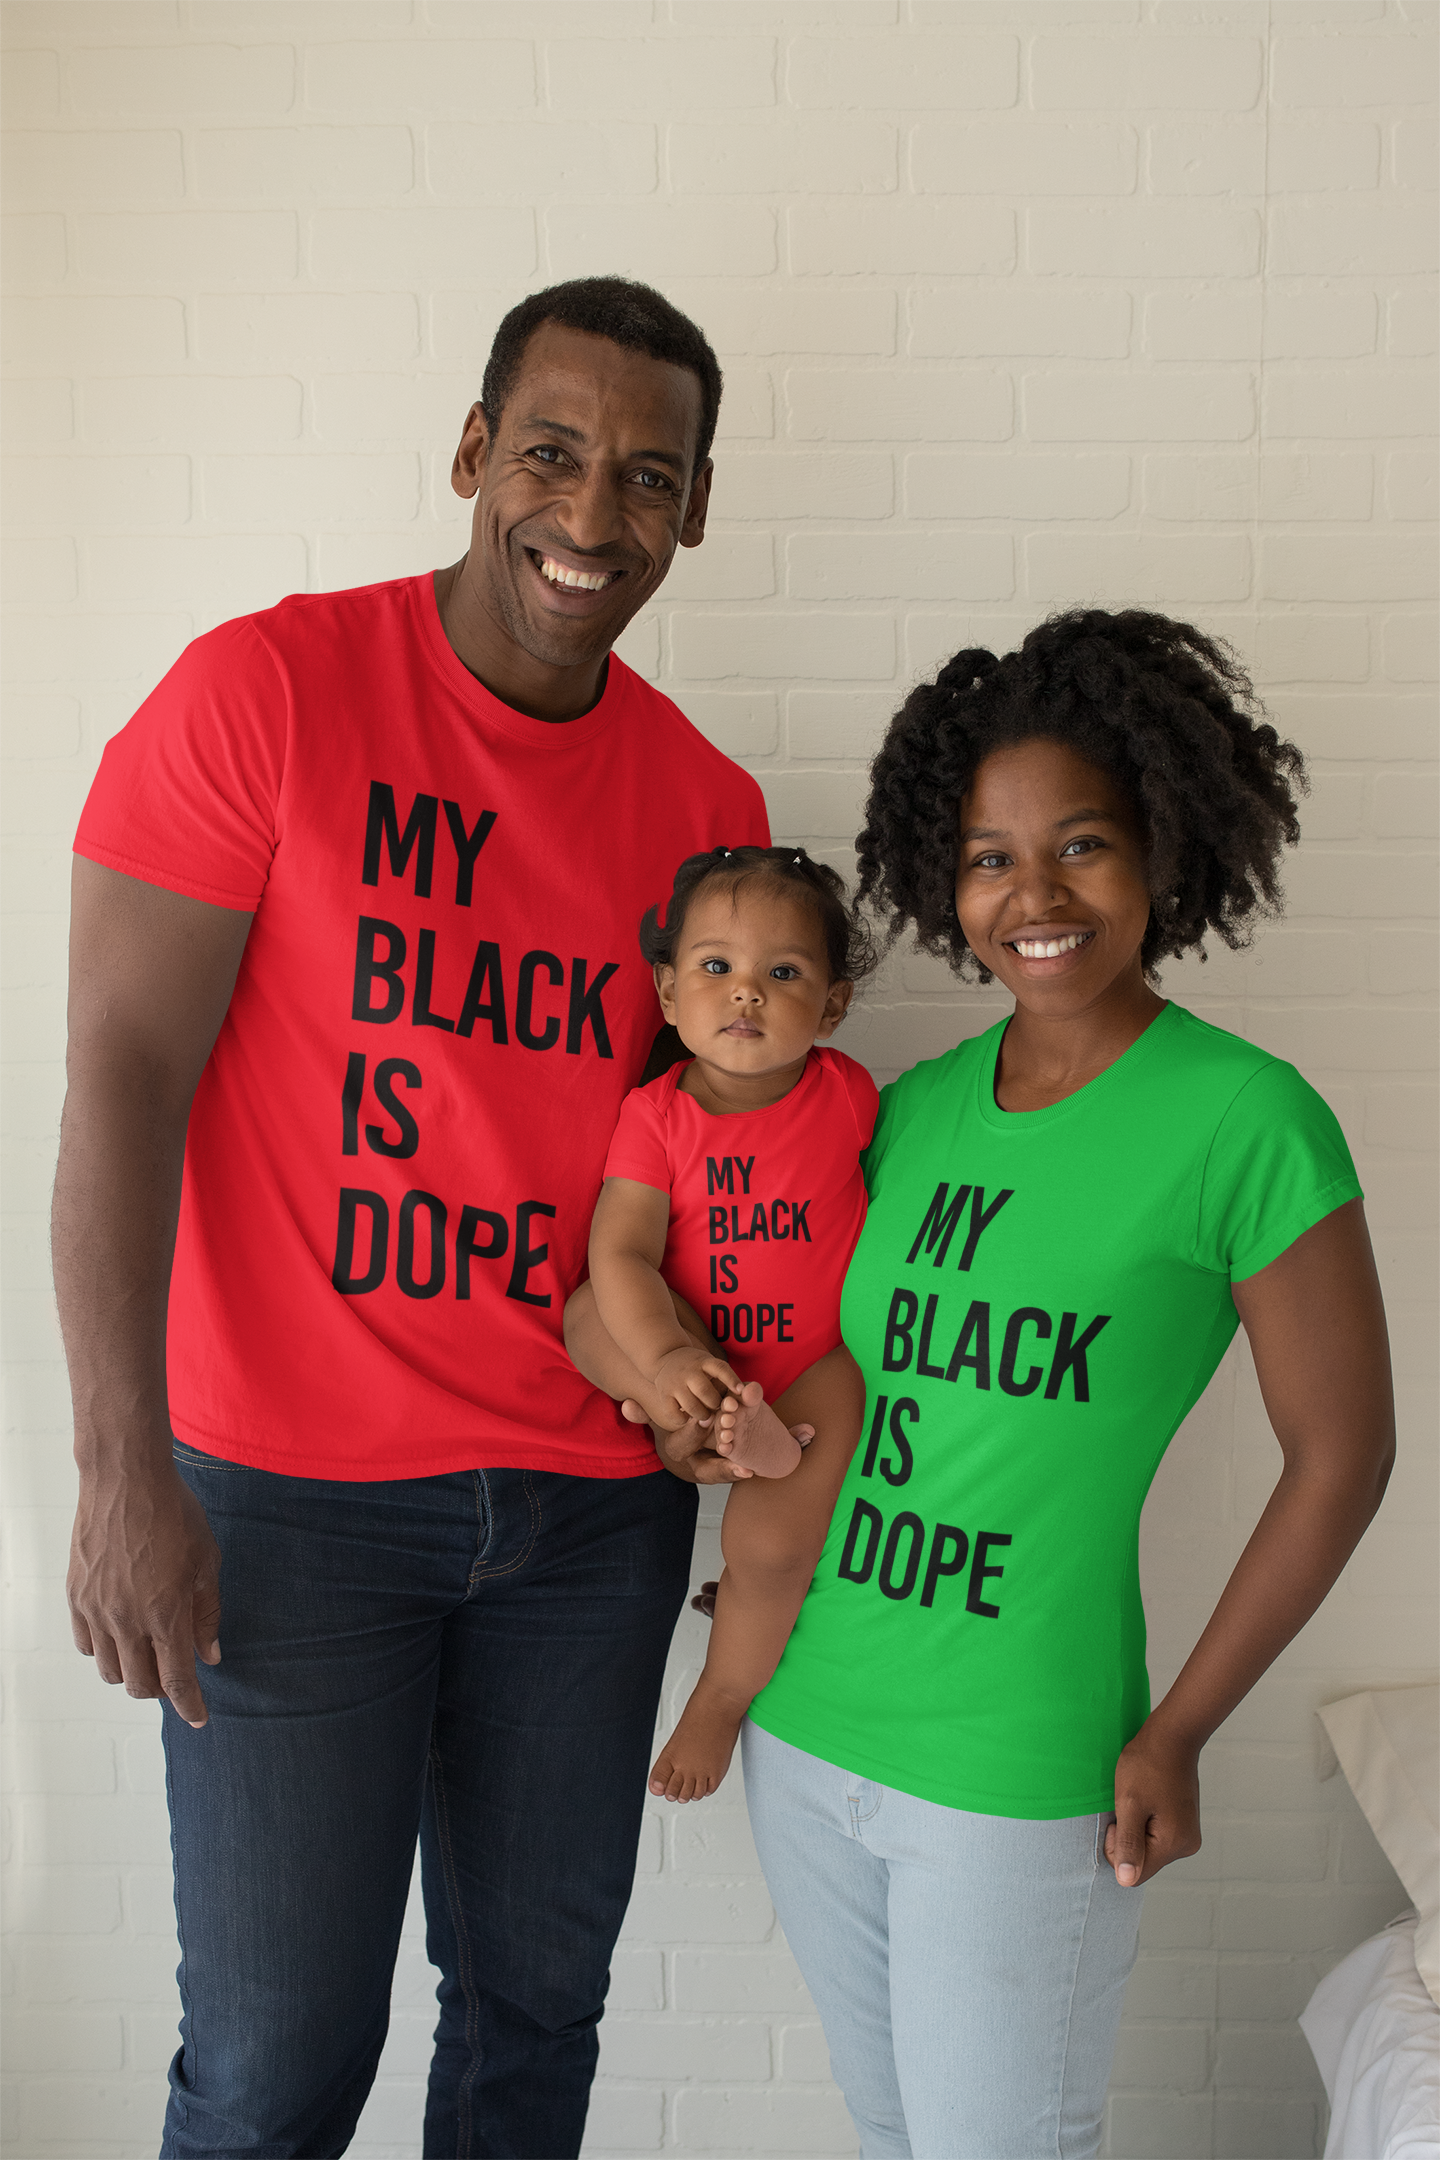 My Black is Dope T-shirt